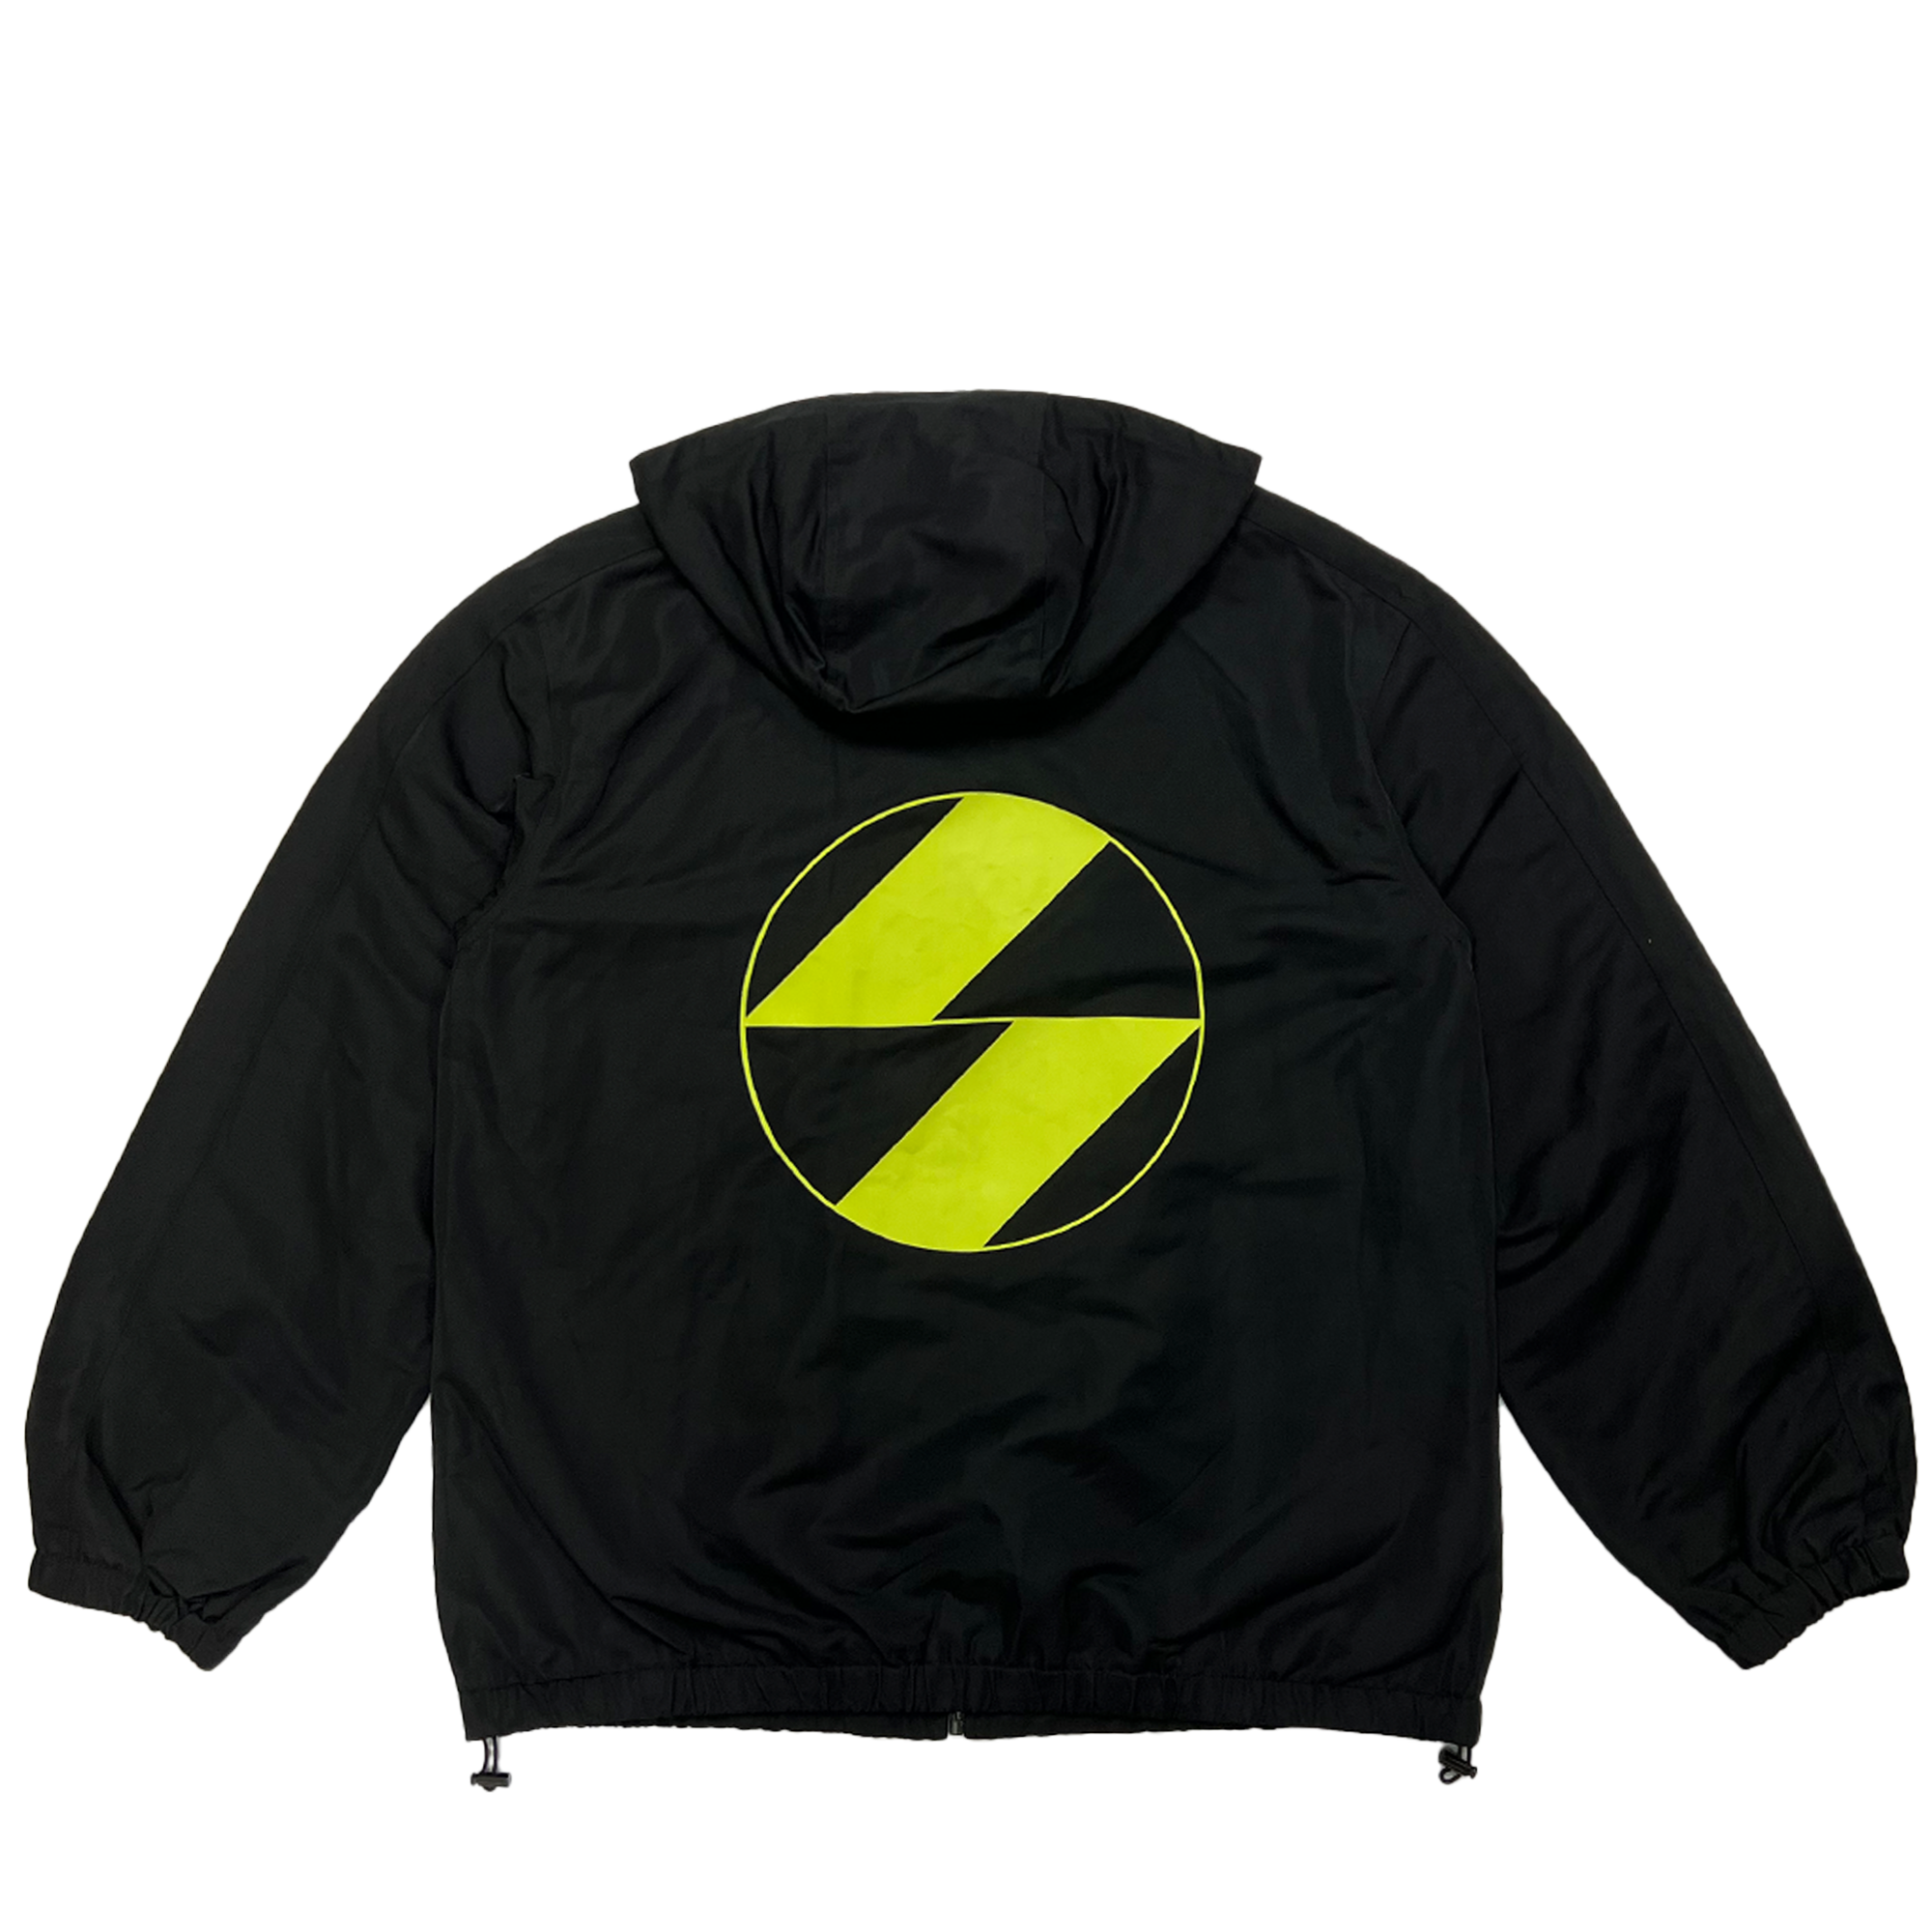 The Salvages 'Sublime' Classic Emblem Windbreaker in Black